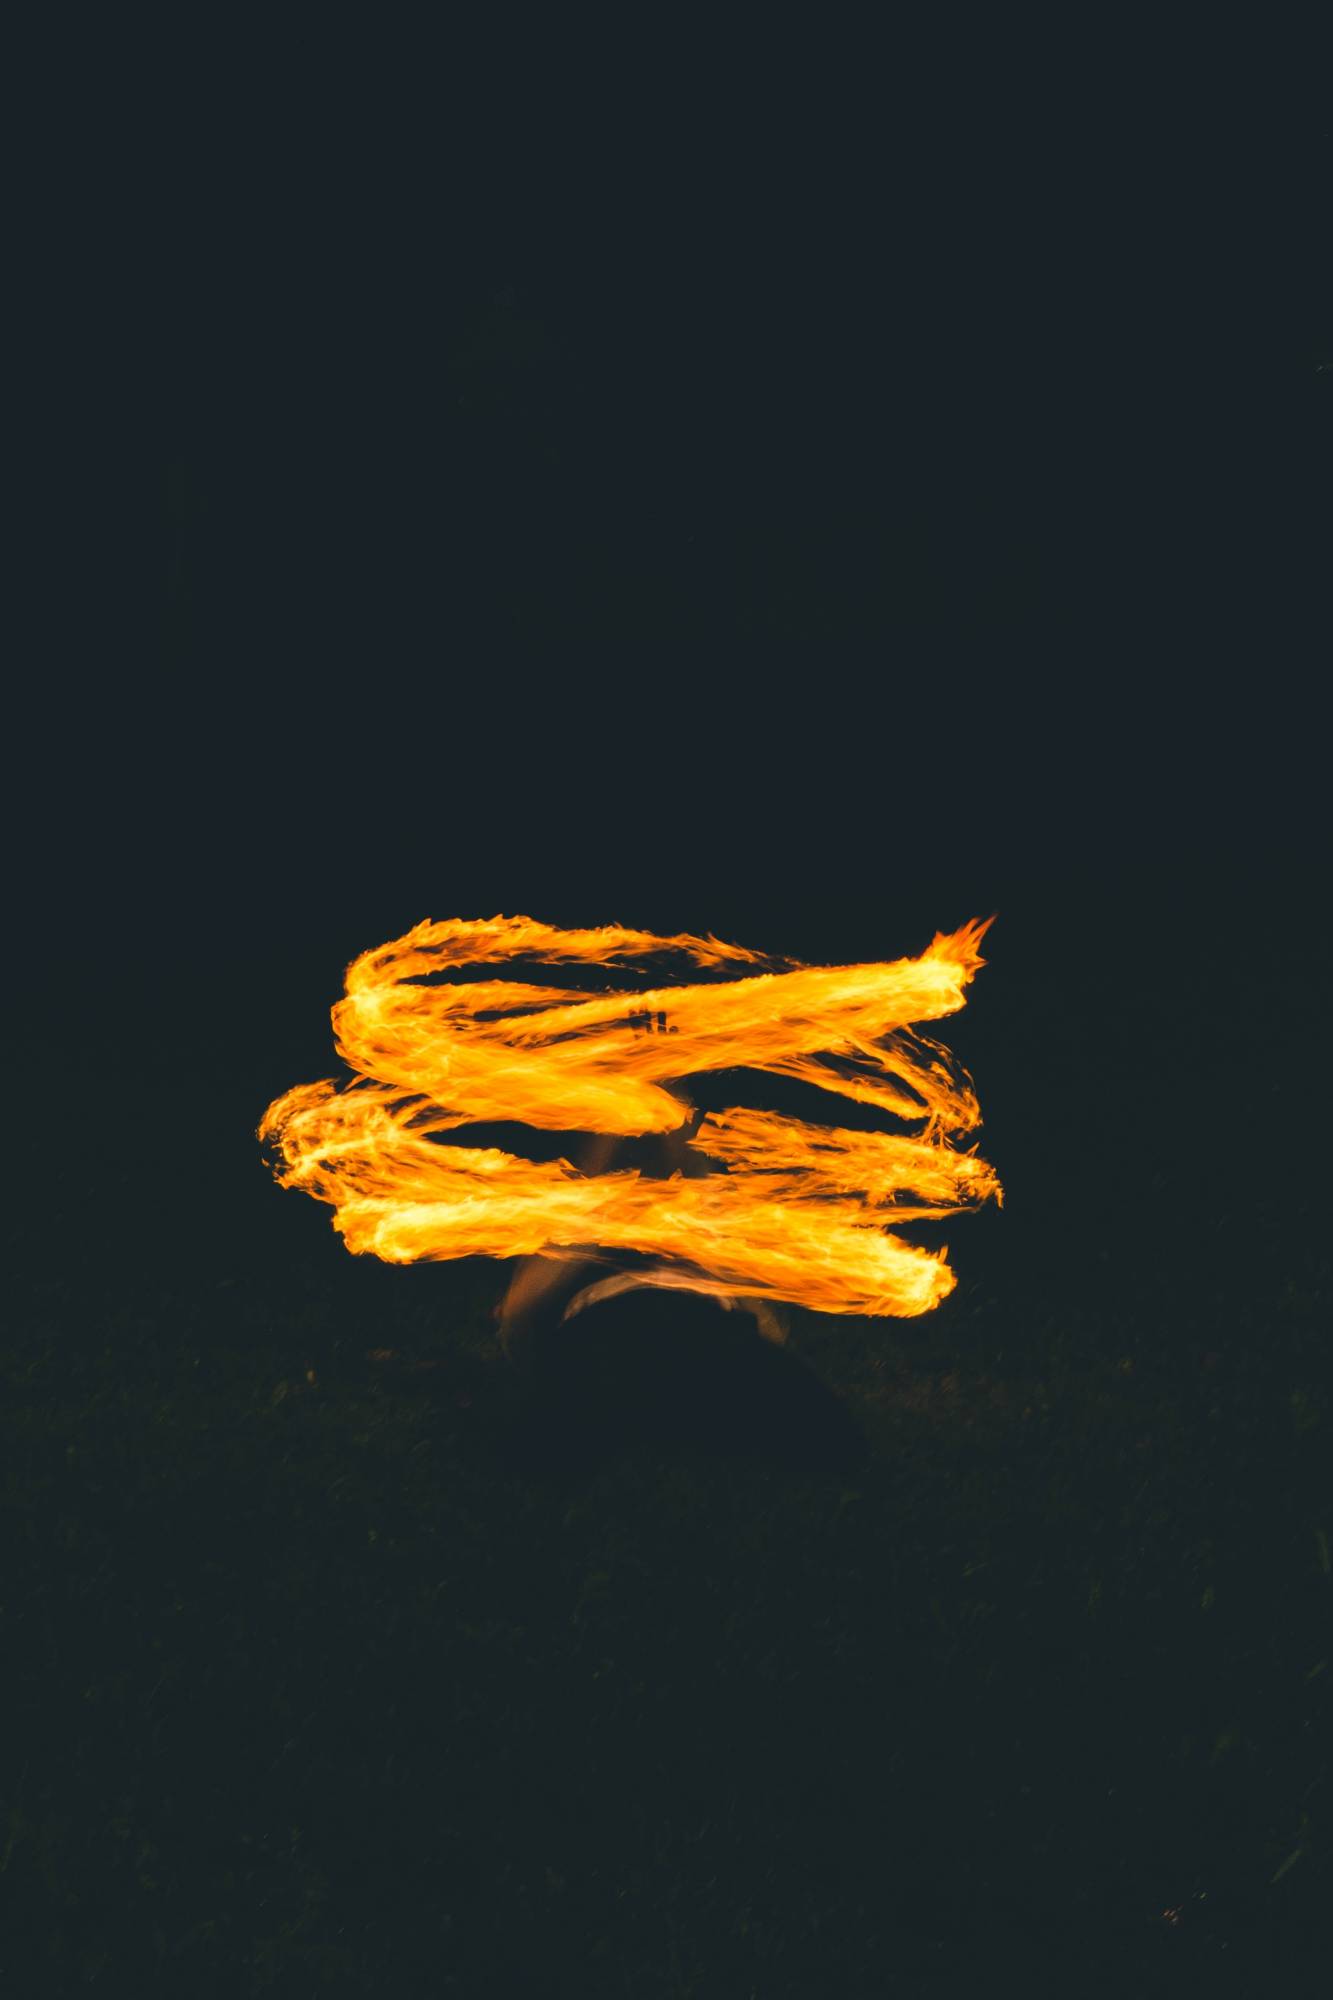 A artistic, flowing yellow, gold flame against a deep black background.